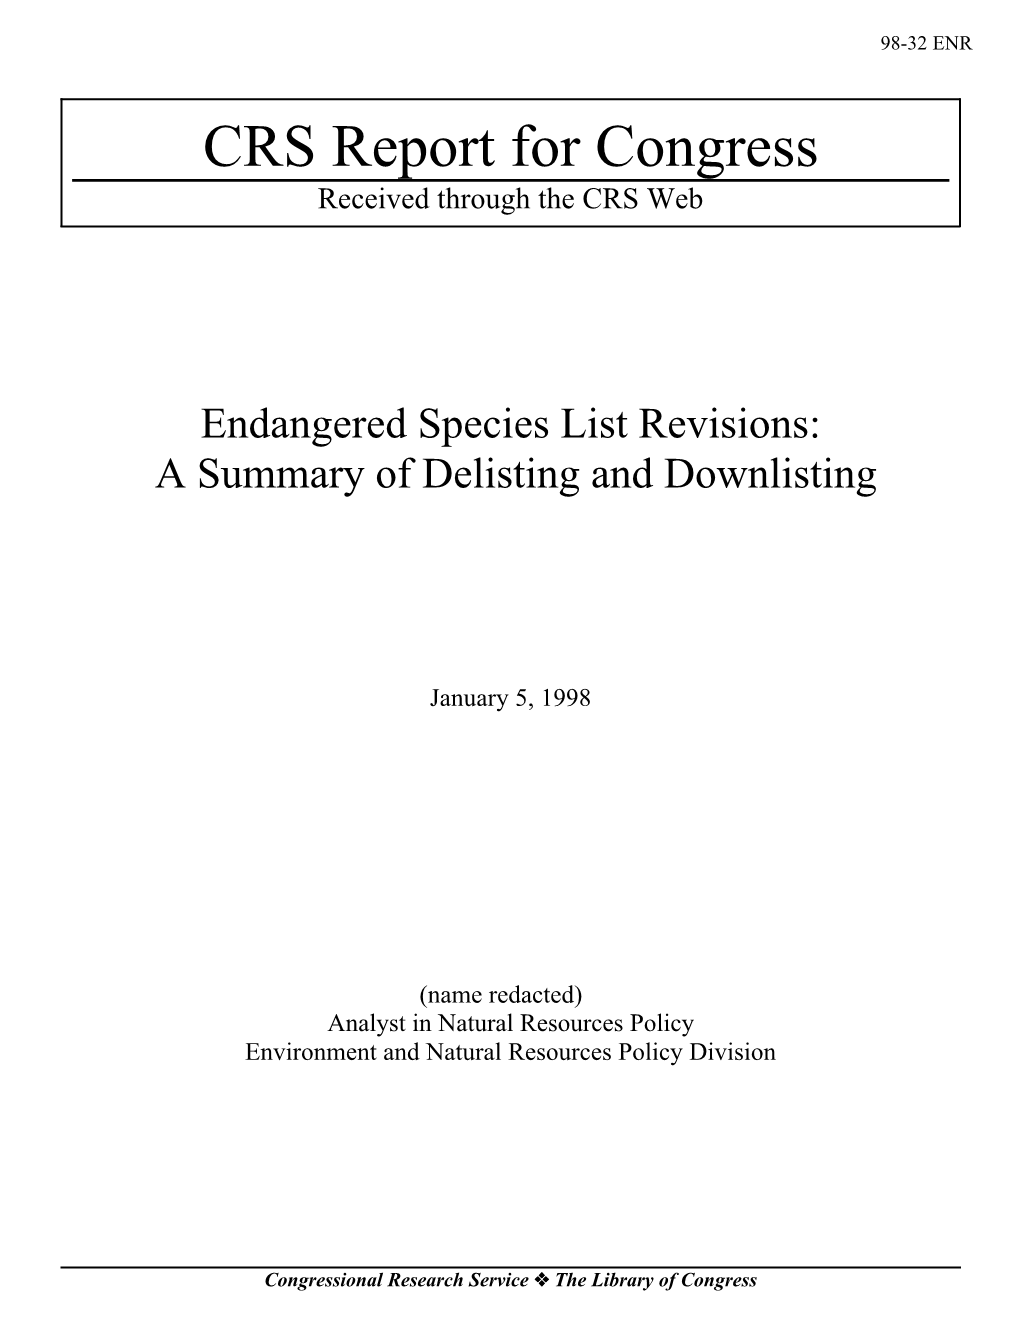 Endangered Species List Revisions: a Summary of Delisting and Downlisting